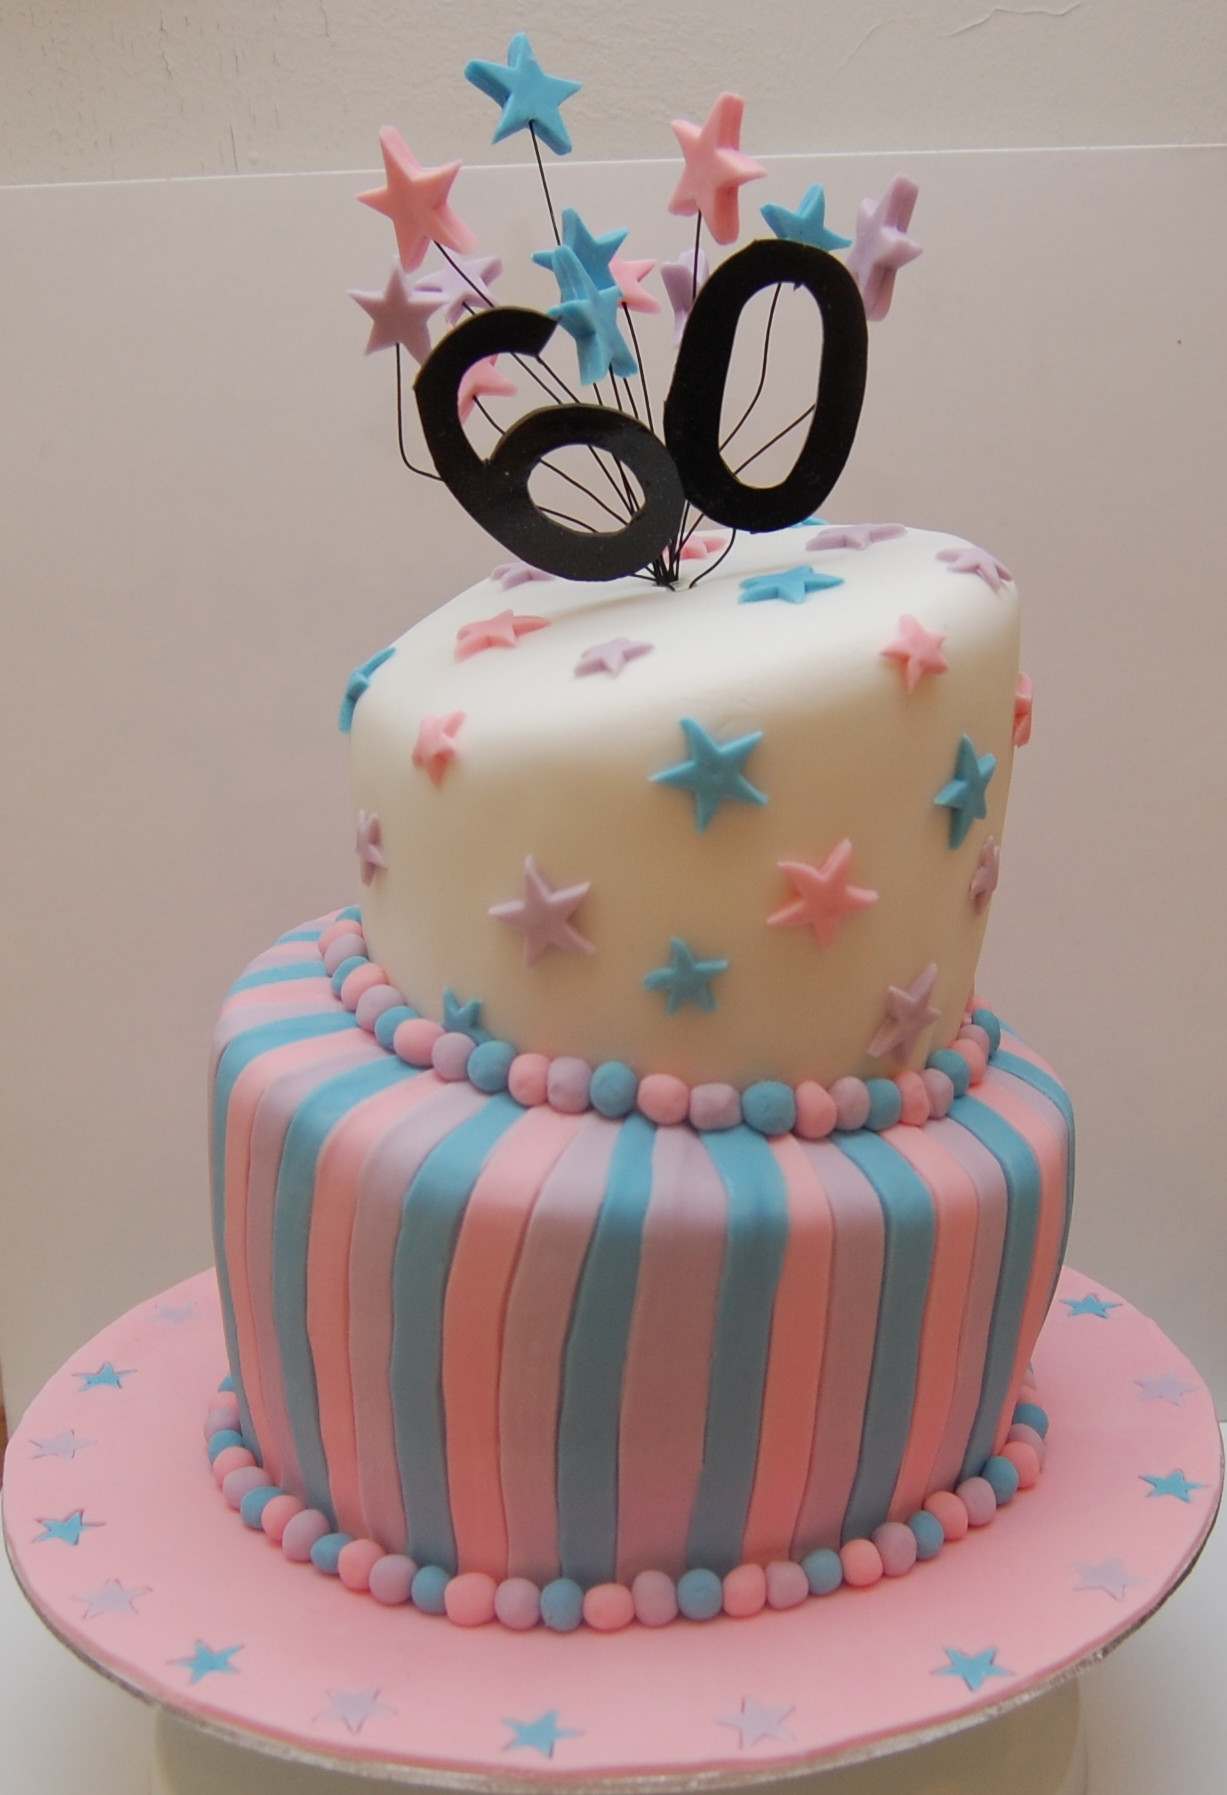 Funny 60th Birthday Cakes
 Wonky cake number 2 yeay A special 60th birthday is the